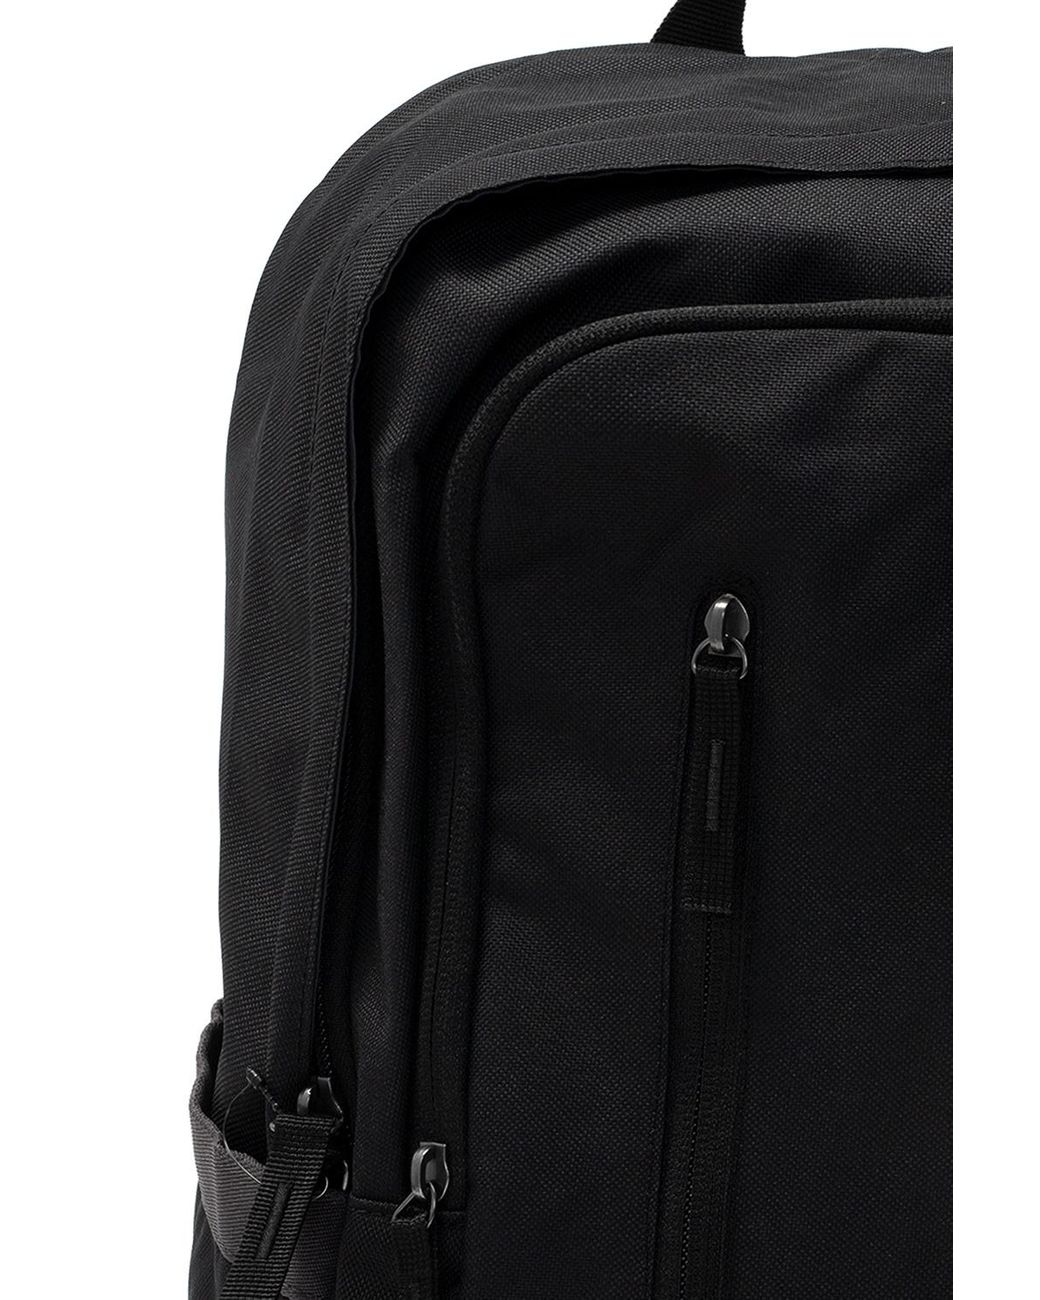 Nike Synthetic All Access Soleday Backpack in Black | Lyst Australia